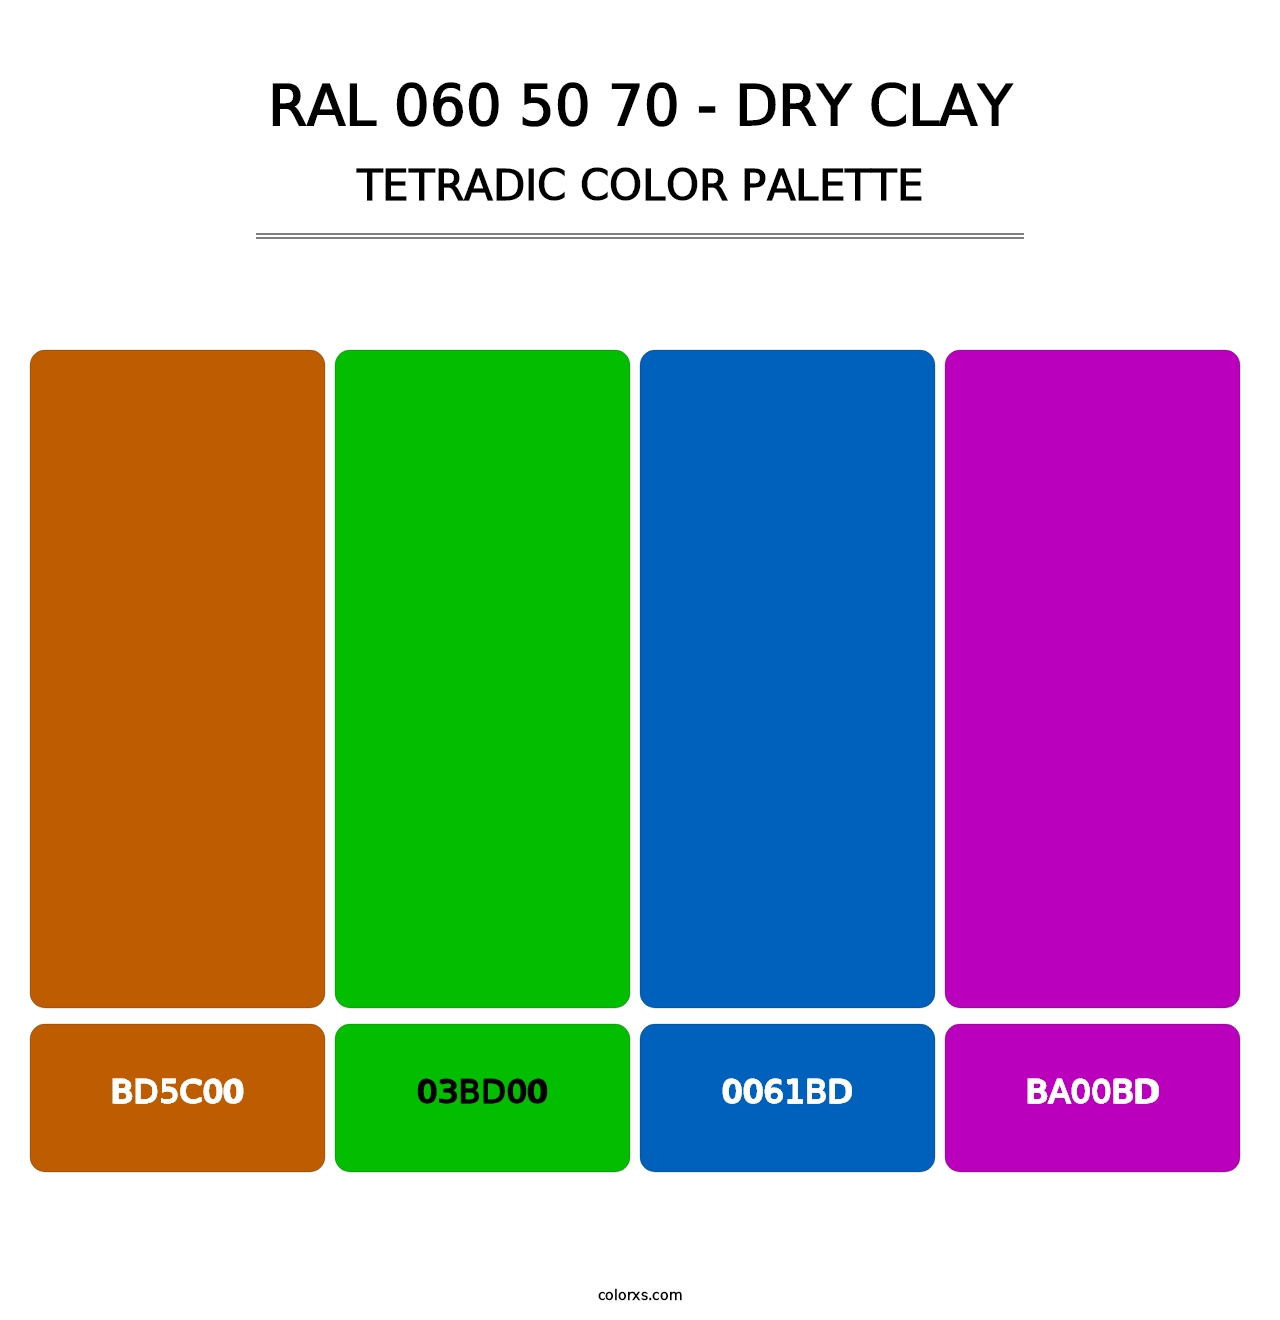 RAL 060 50 70 - Dry Clay - Tetradic Color Palette